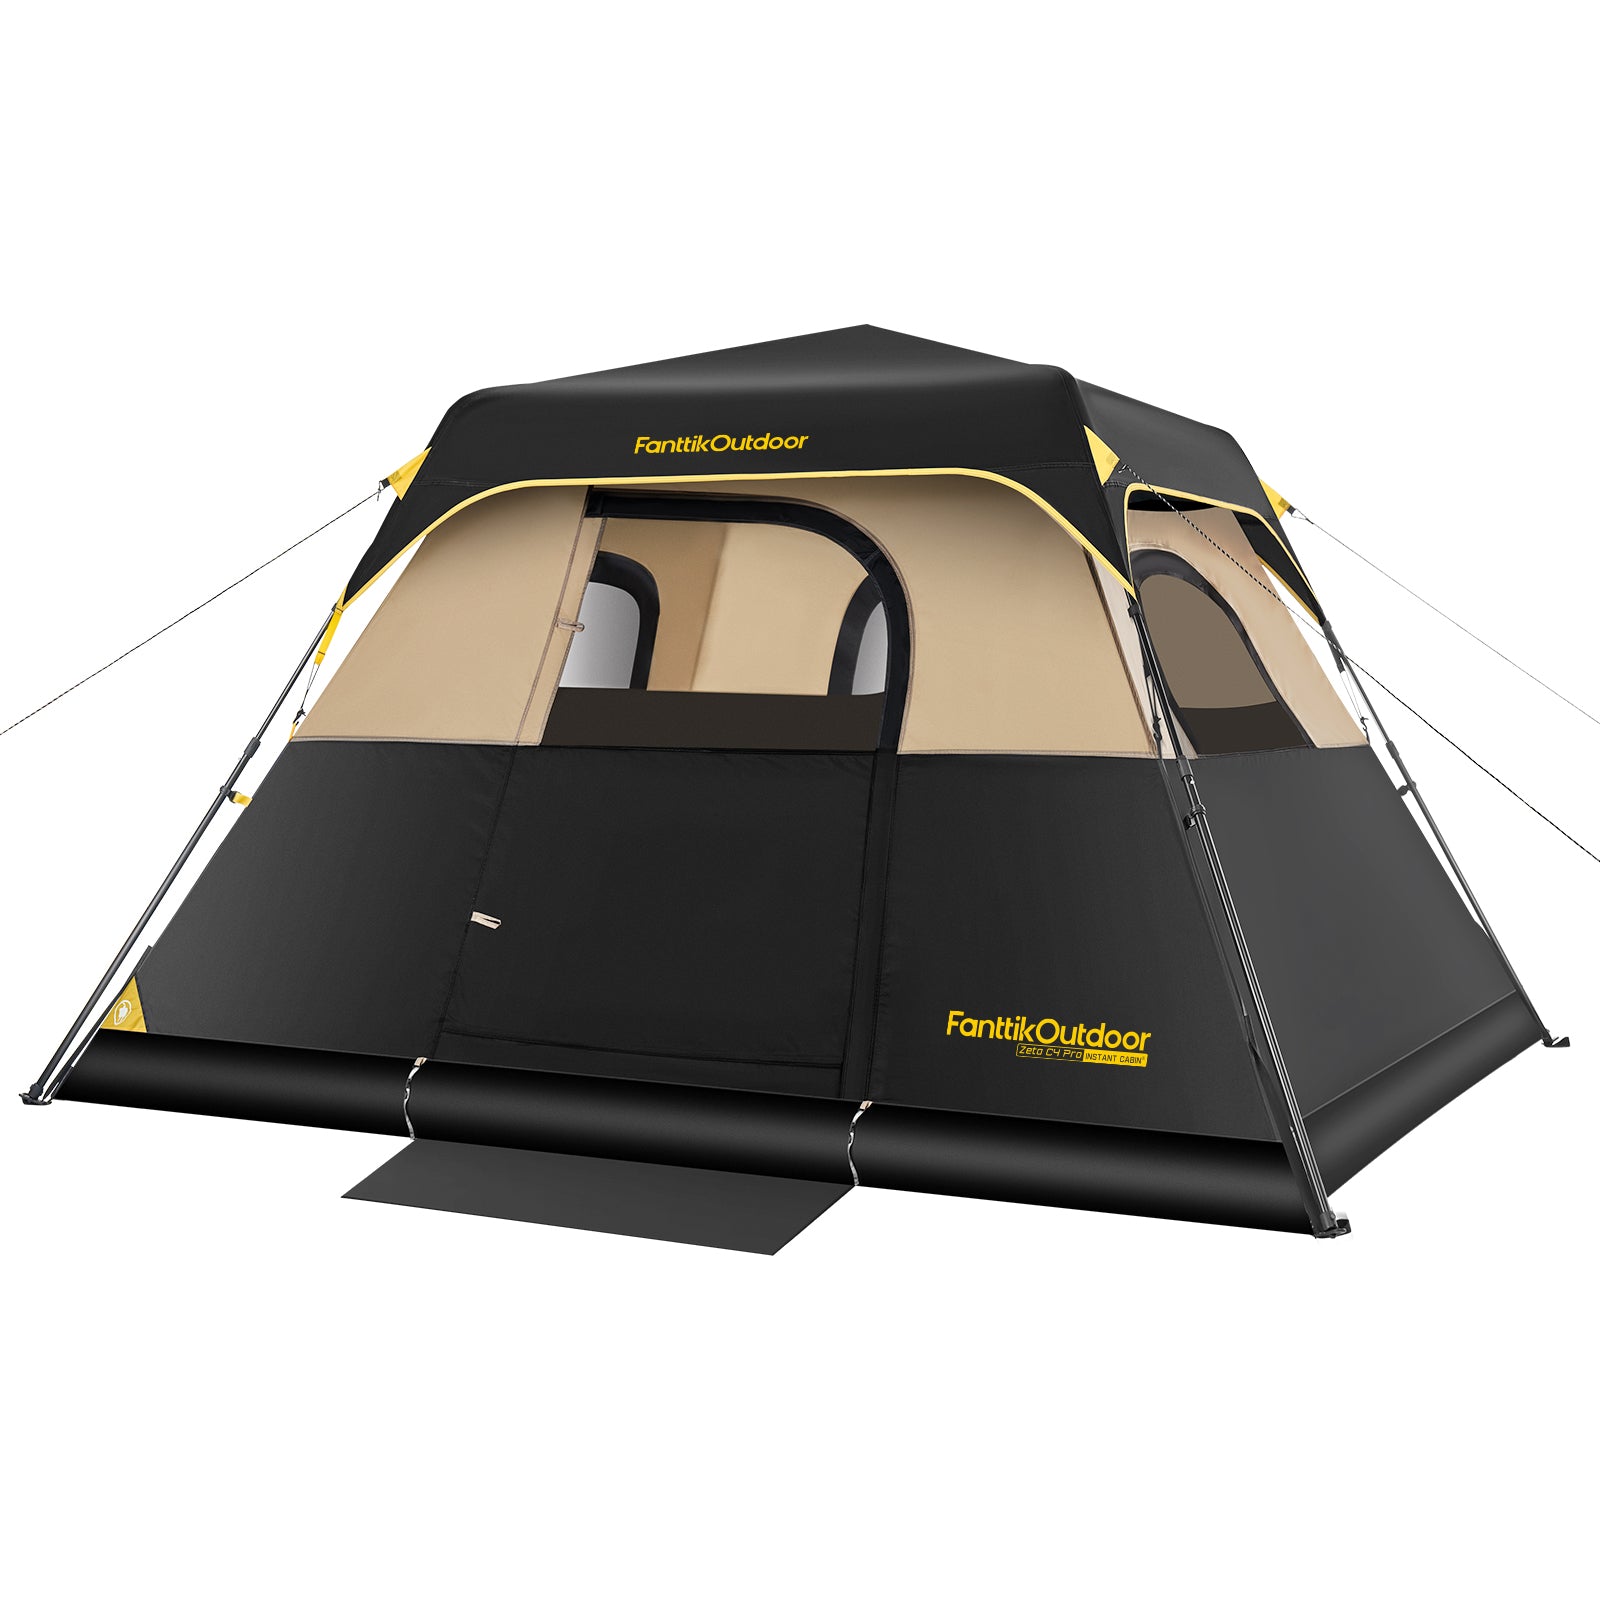 Fanttik Outdoor Zeta C4 Pro 4 Person Camping Tent featuring black and tan design with visible brand name and large windows for ventilation.